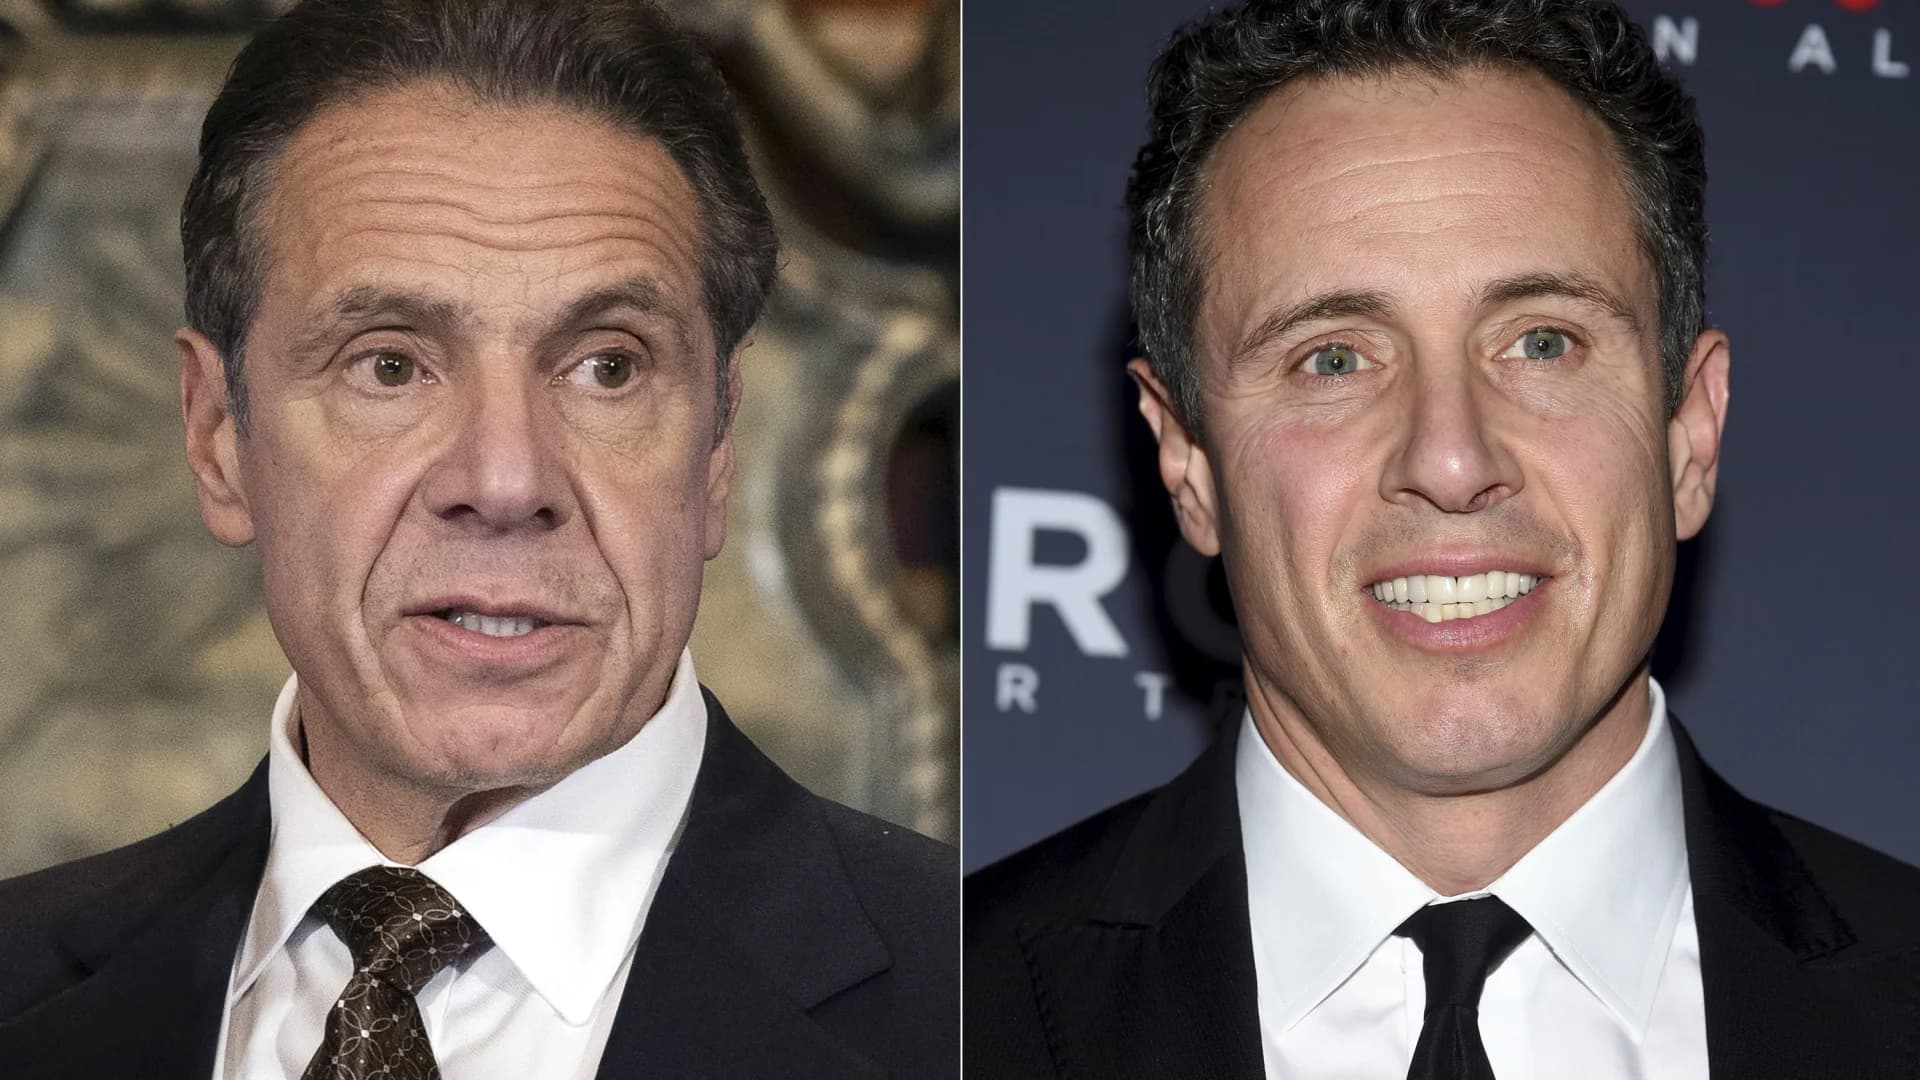 New details on Chris Cuomo's role advising brother Andrew